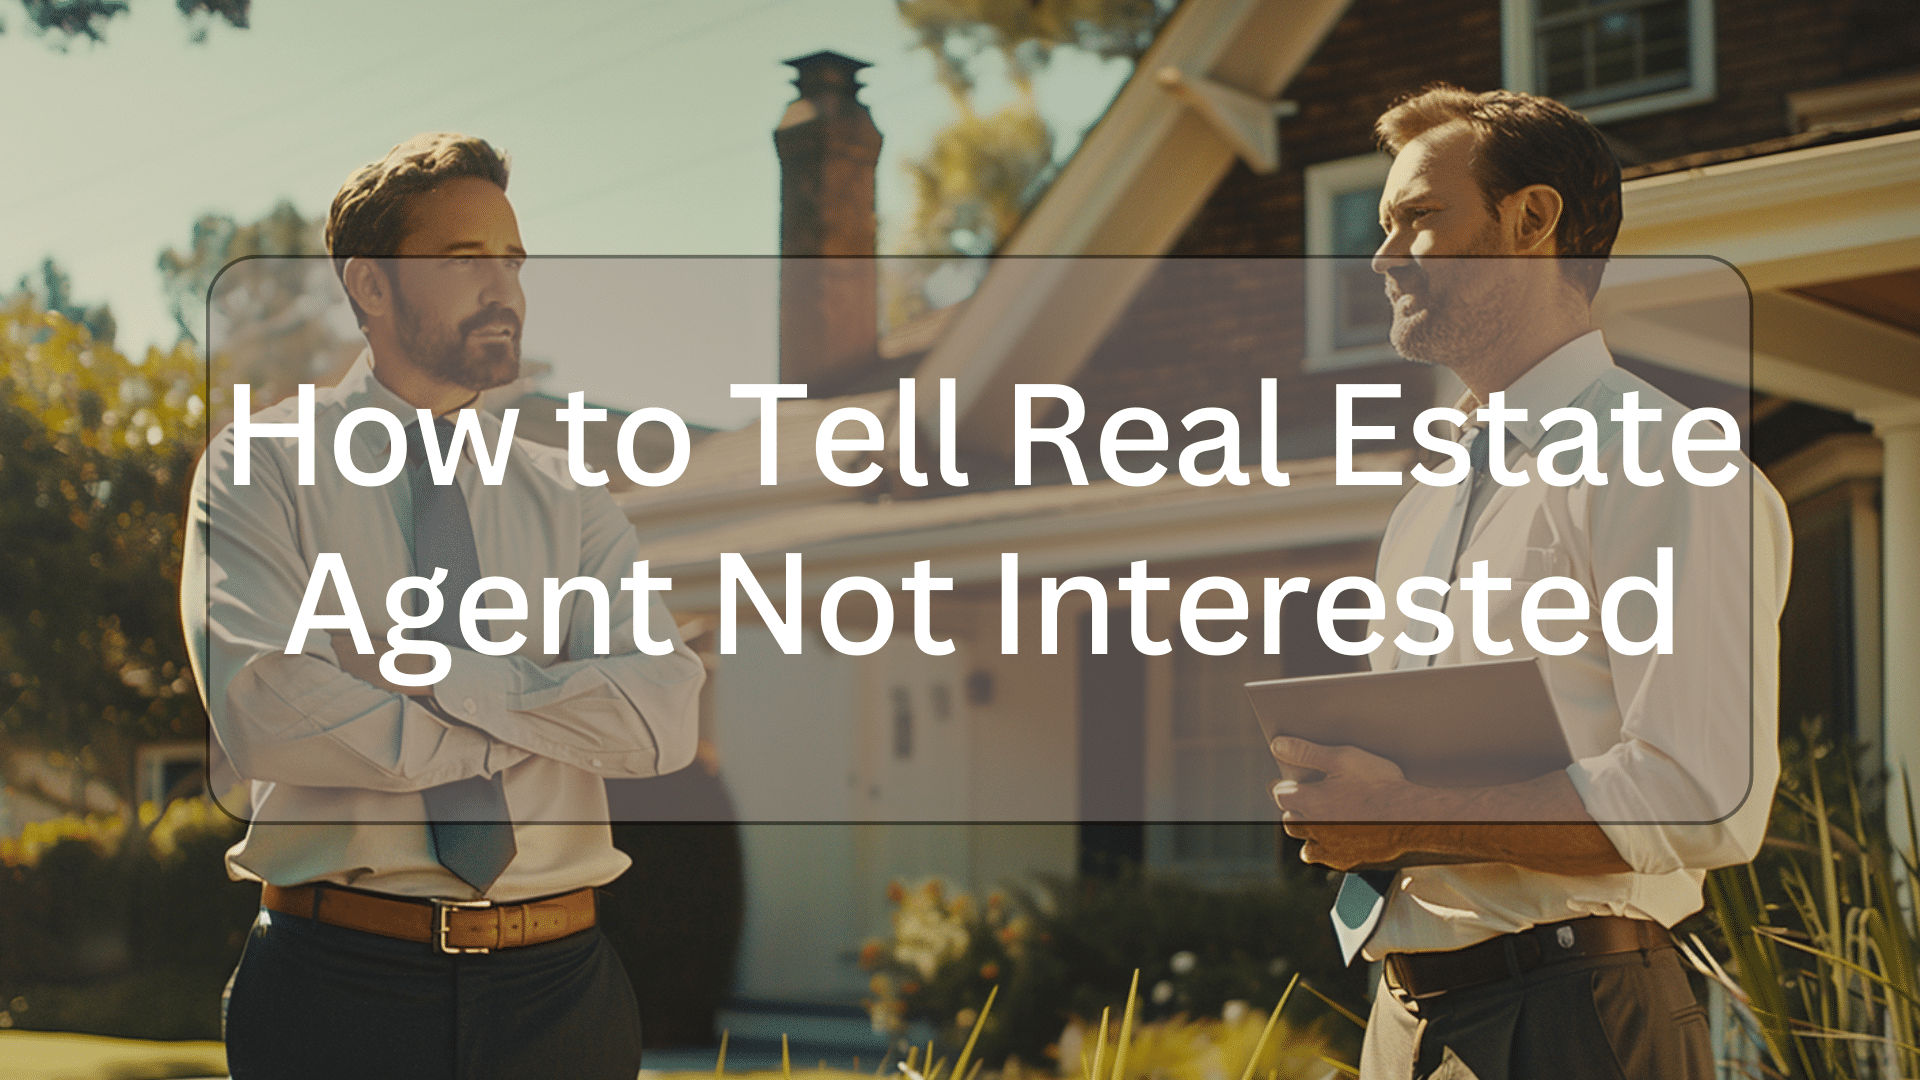 How to tell real estate agent not interested illustration